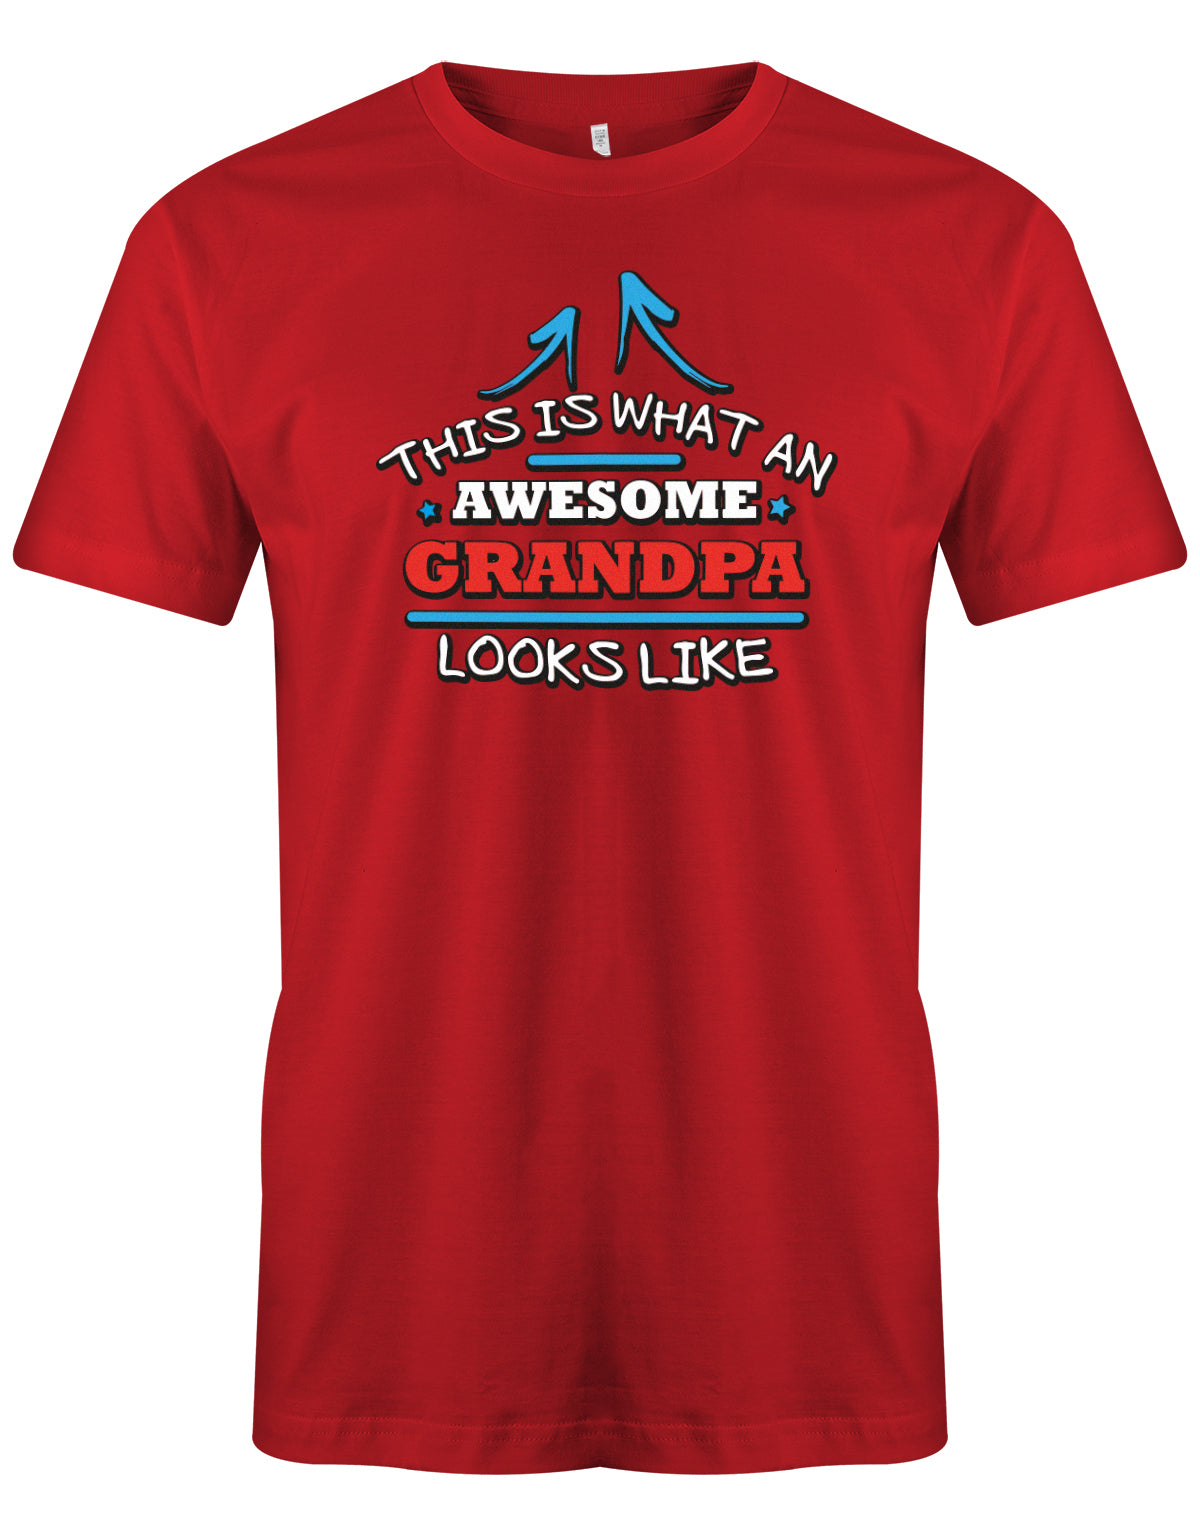 Opa T-Shirt – This is what an awesome Grandpa looks like. So sieht ein toller Opa aus. Rot